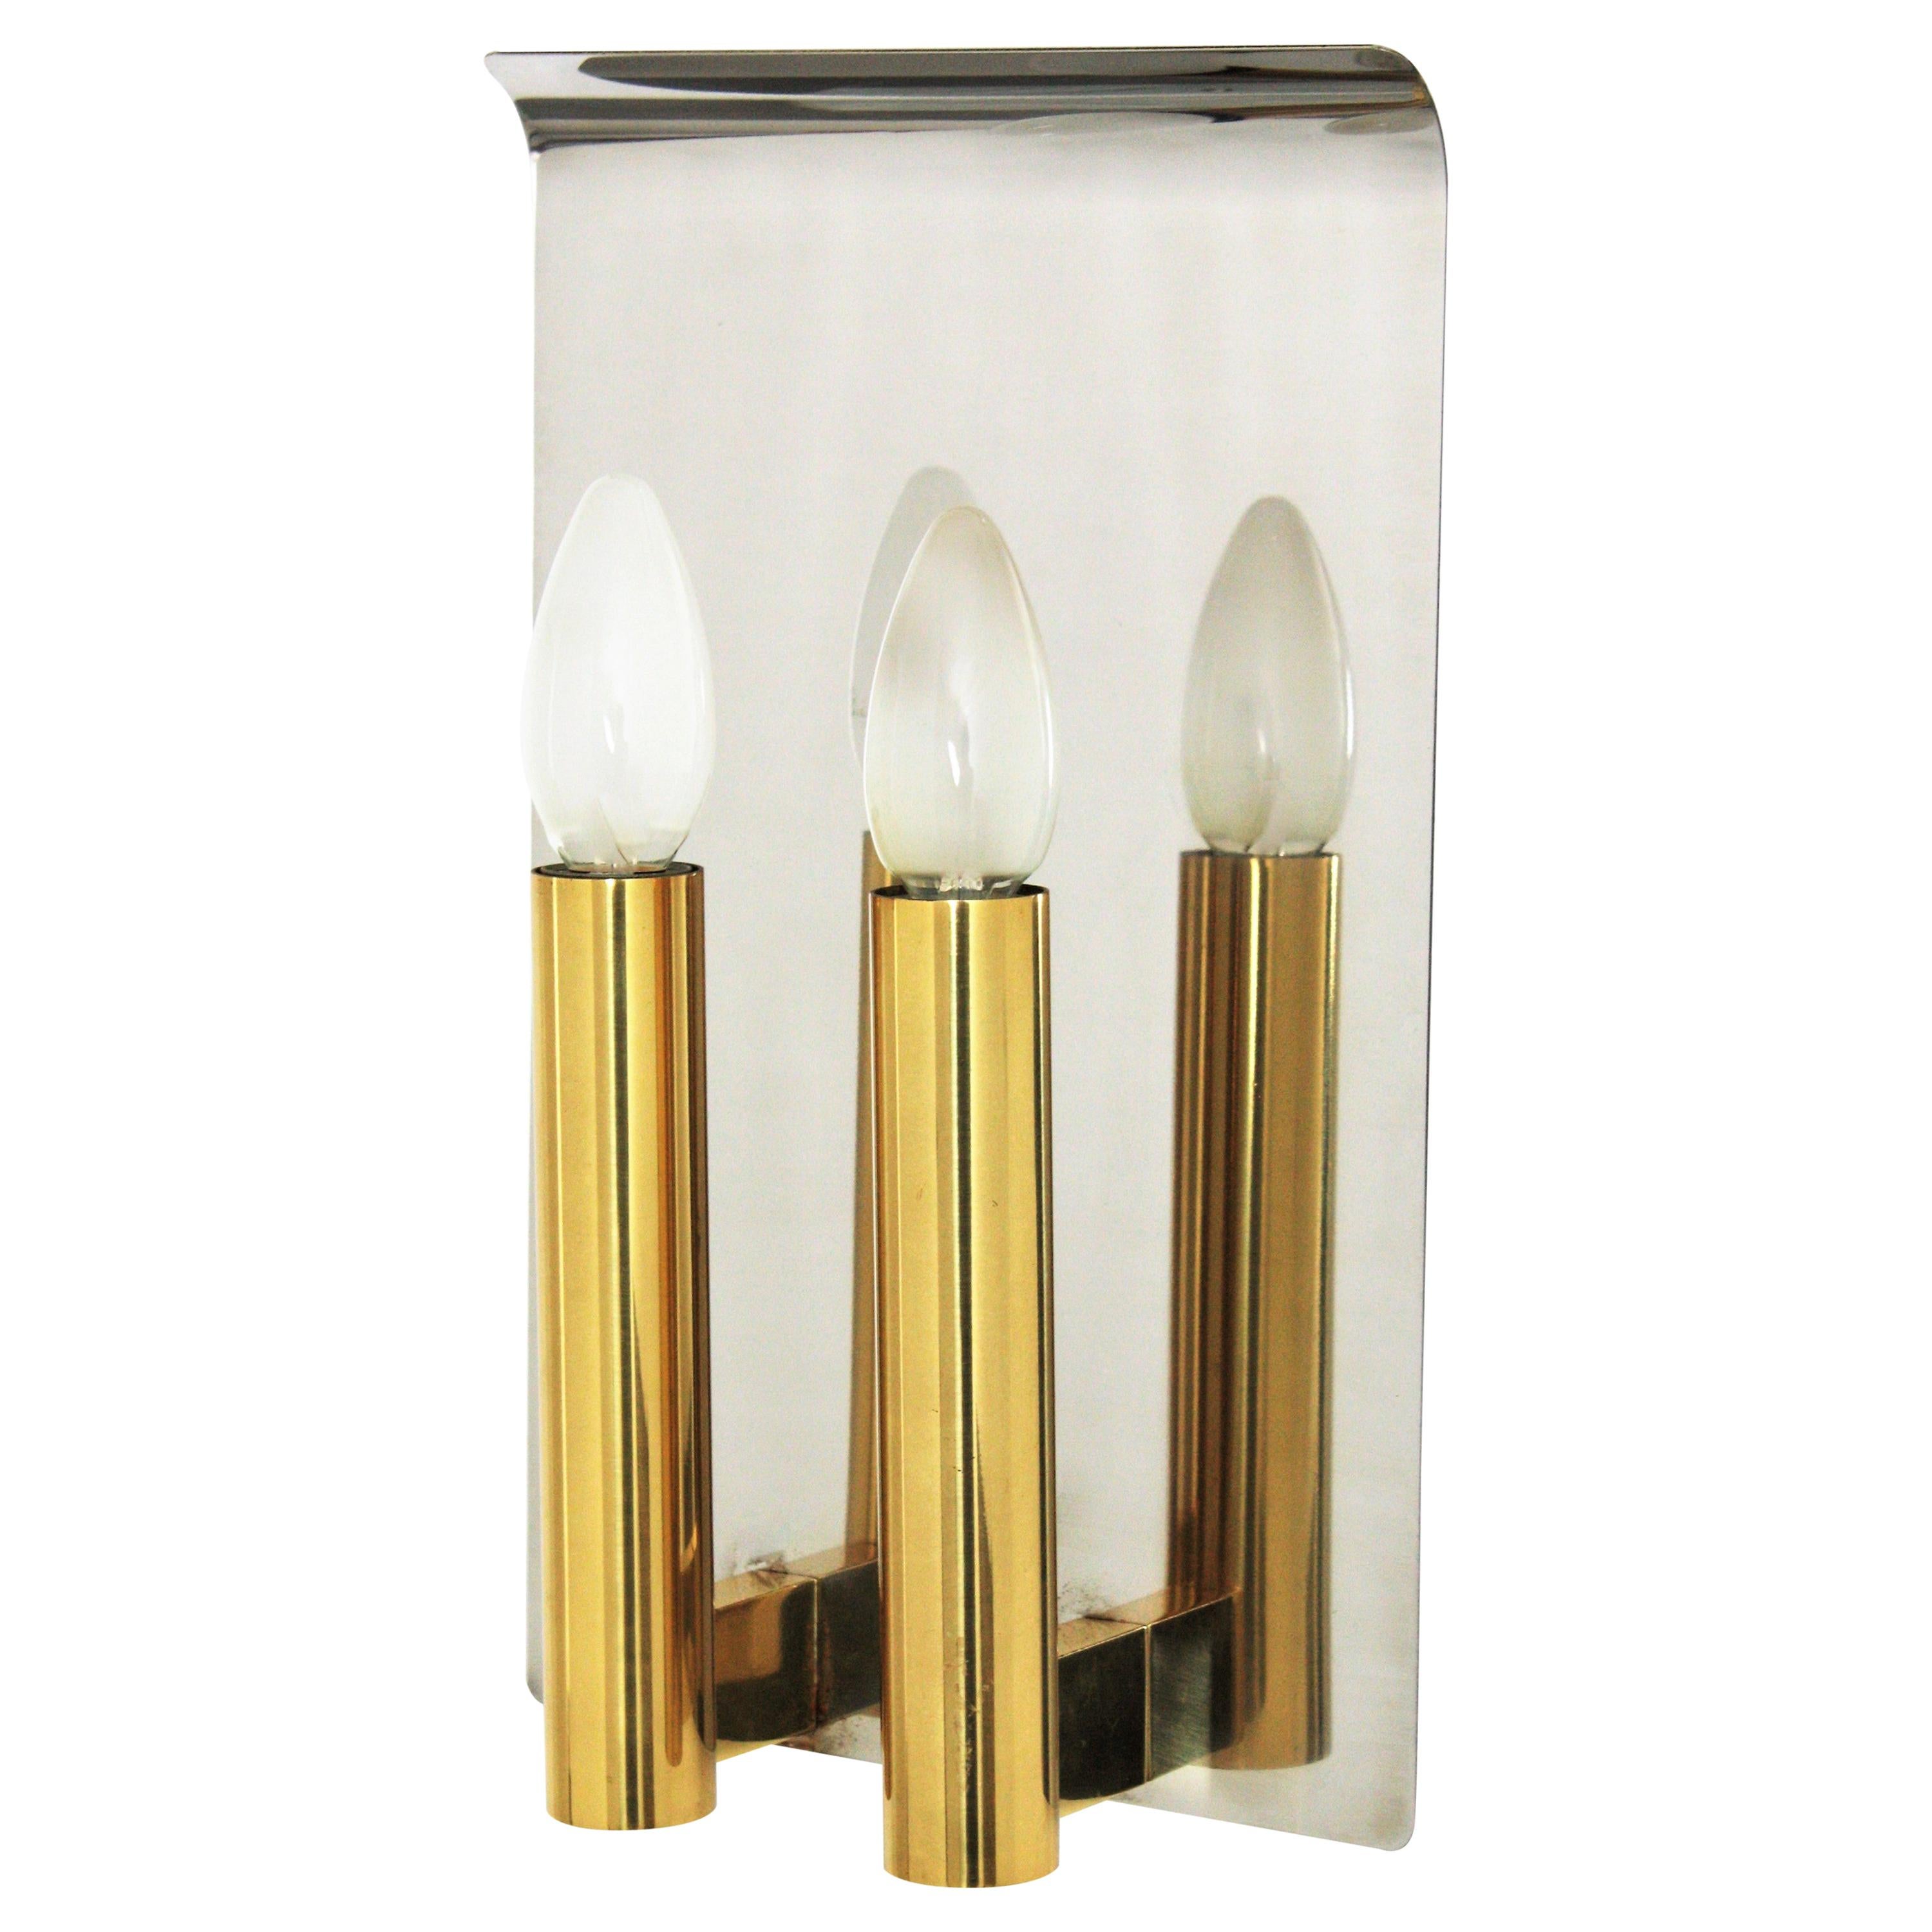 Sciolari Wall Sconce in Brass and Steel, Italy, 1960s